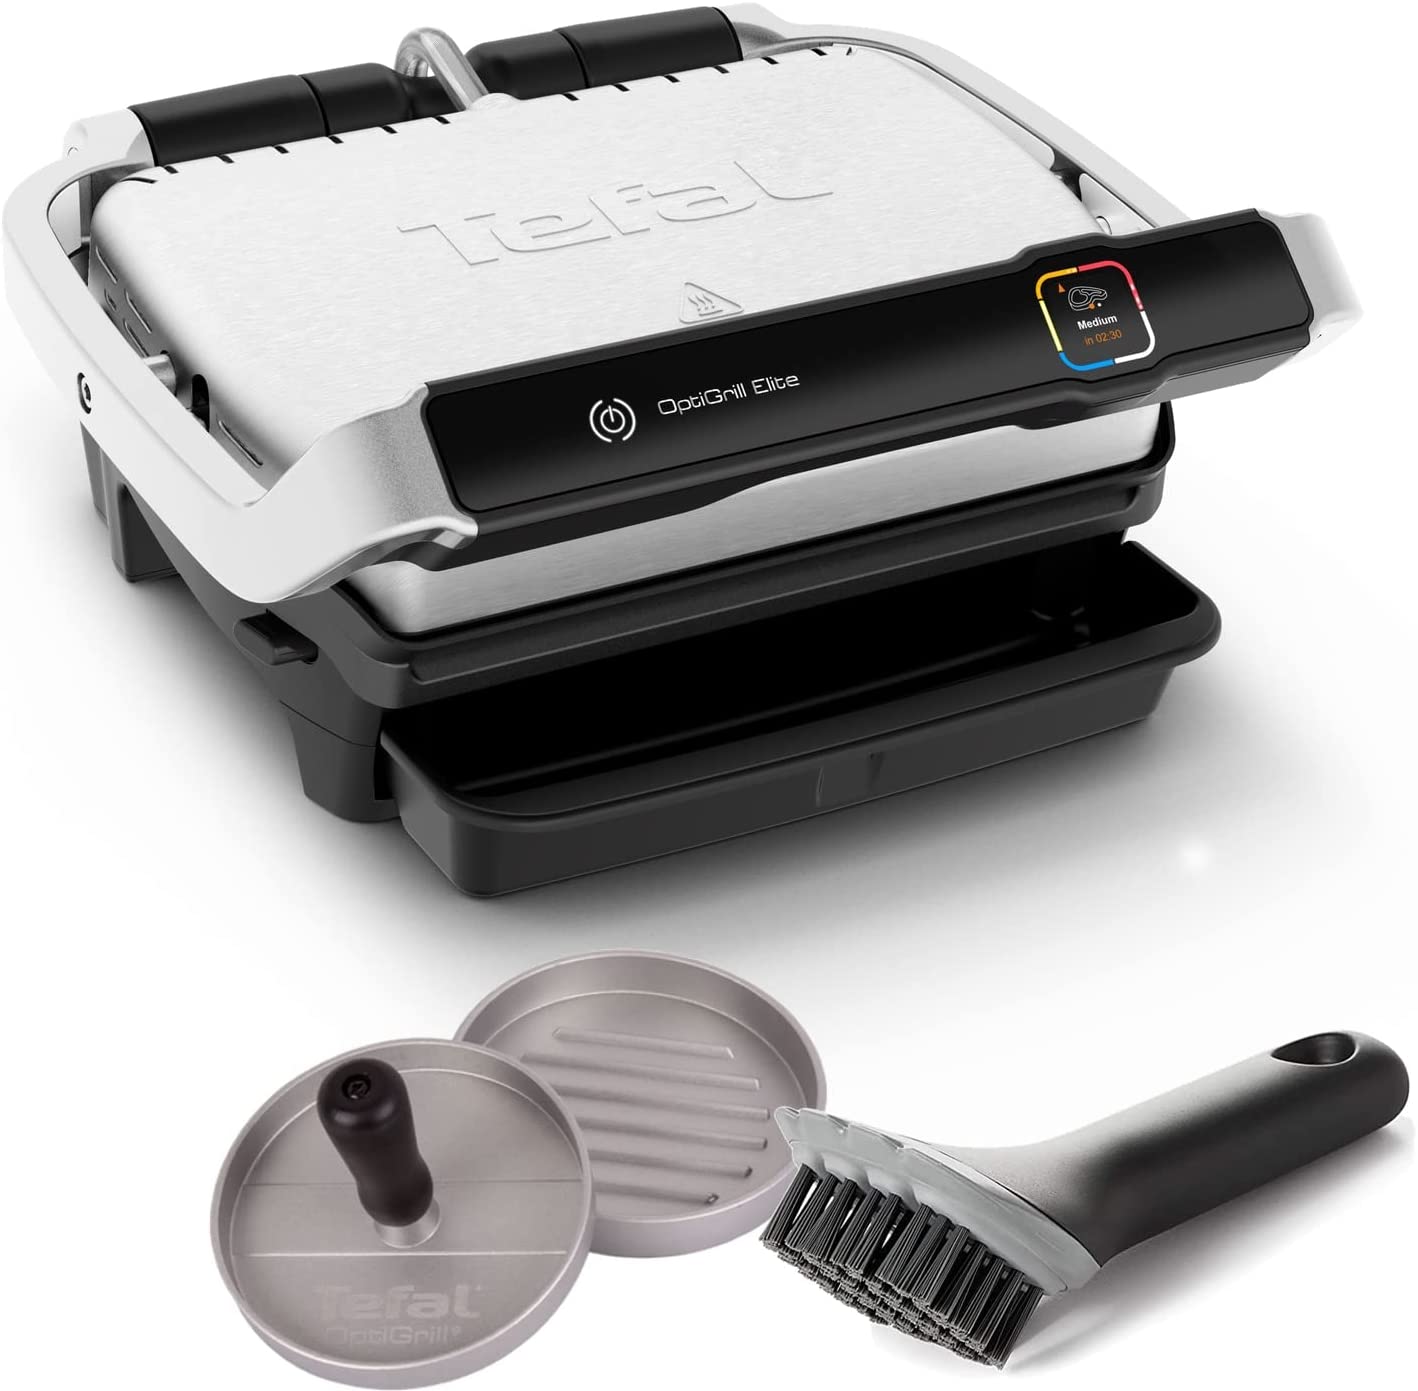 Tefal Optigrill Elite Contact Grill with Grill Boost Function 2000 W + Hamb